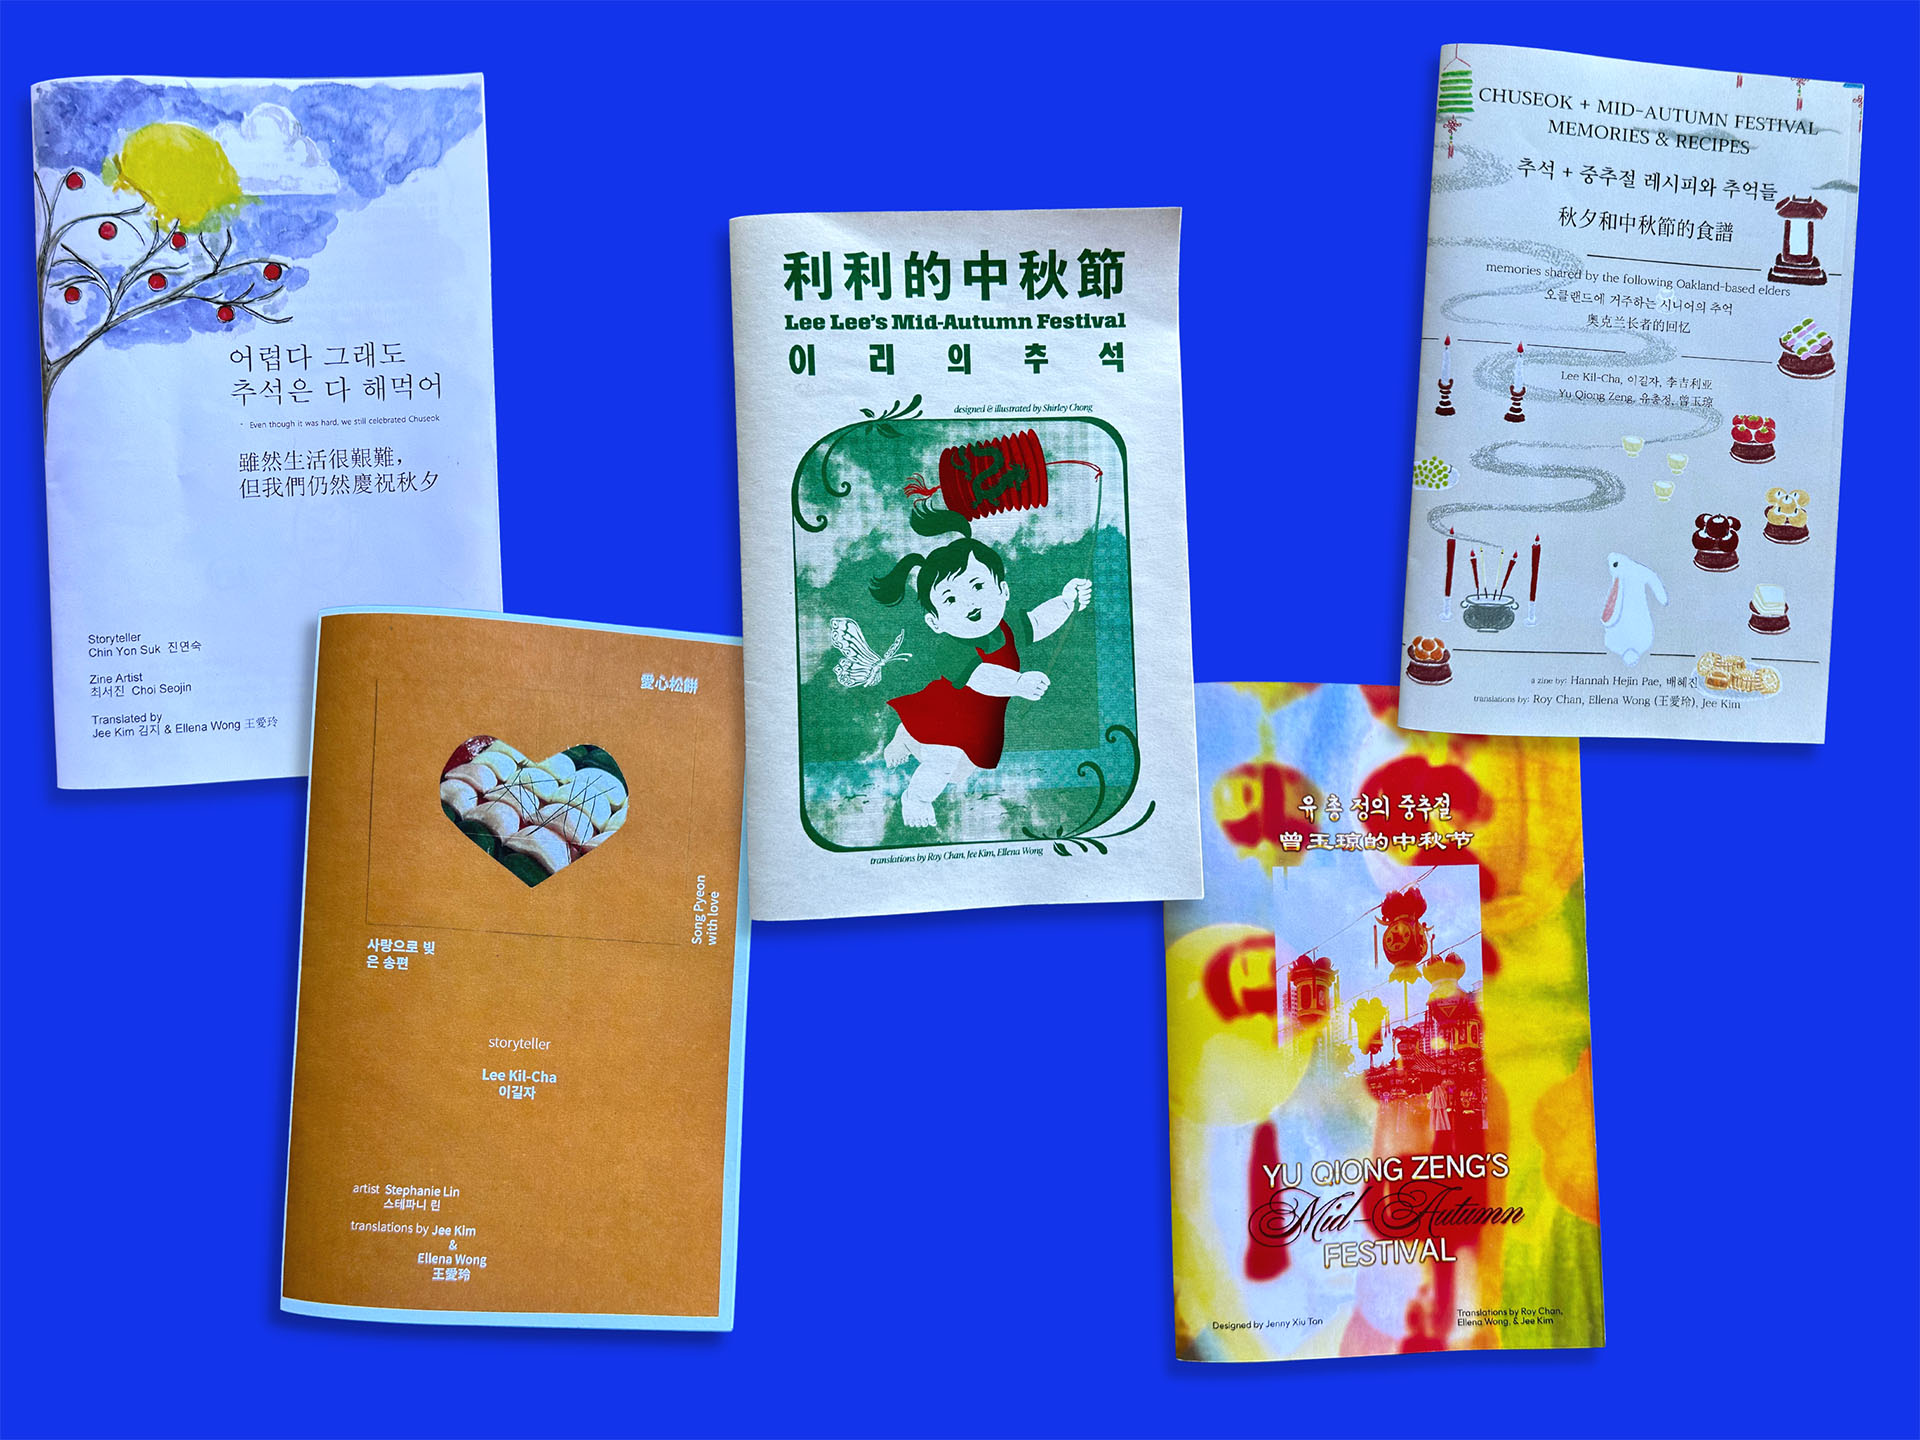 Five illustrated zines with Korean, English and Chinese text, shown against a blue background.